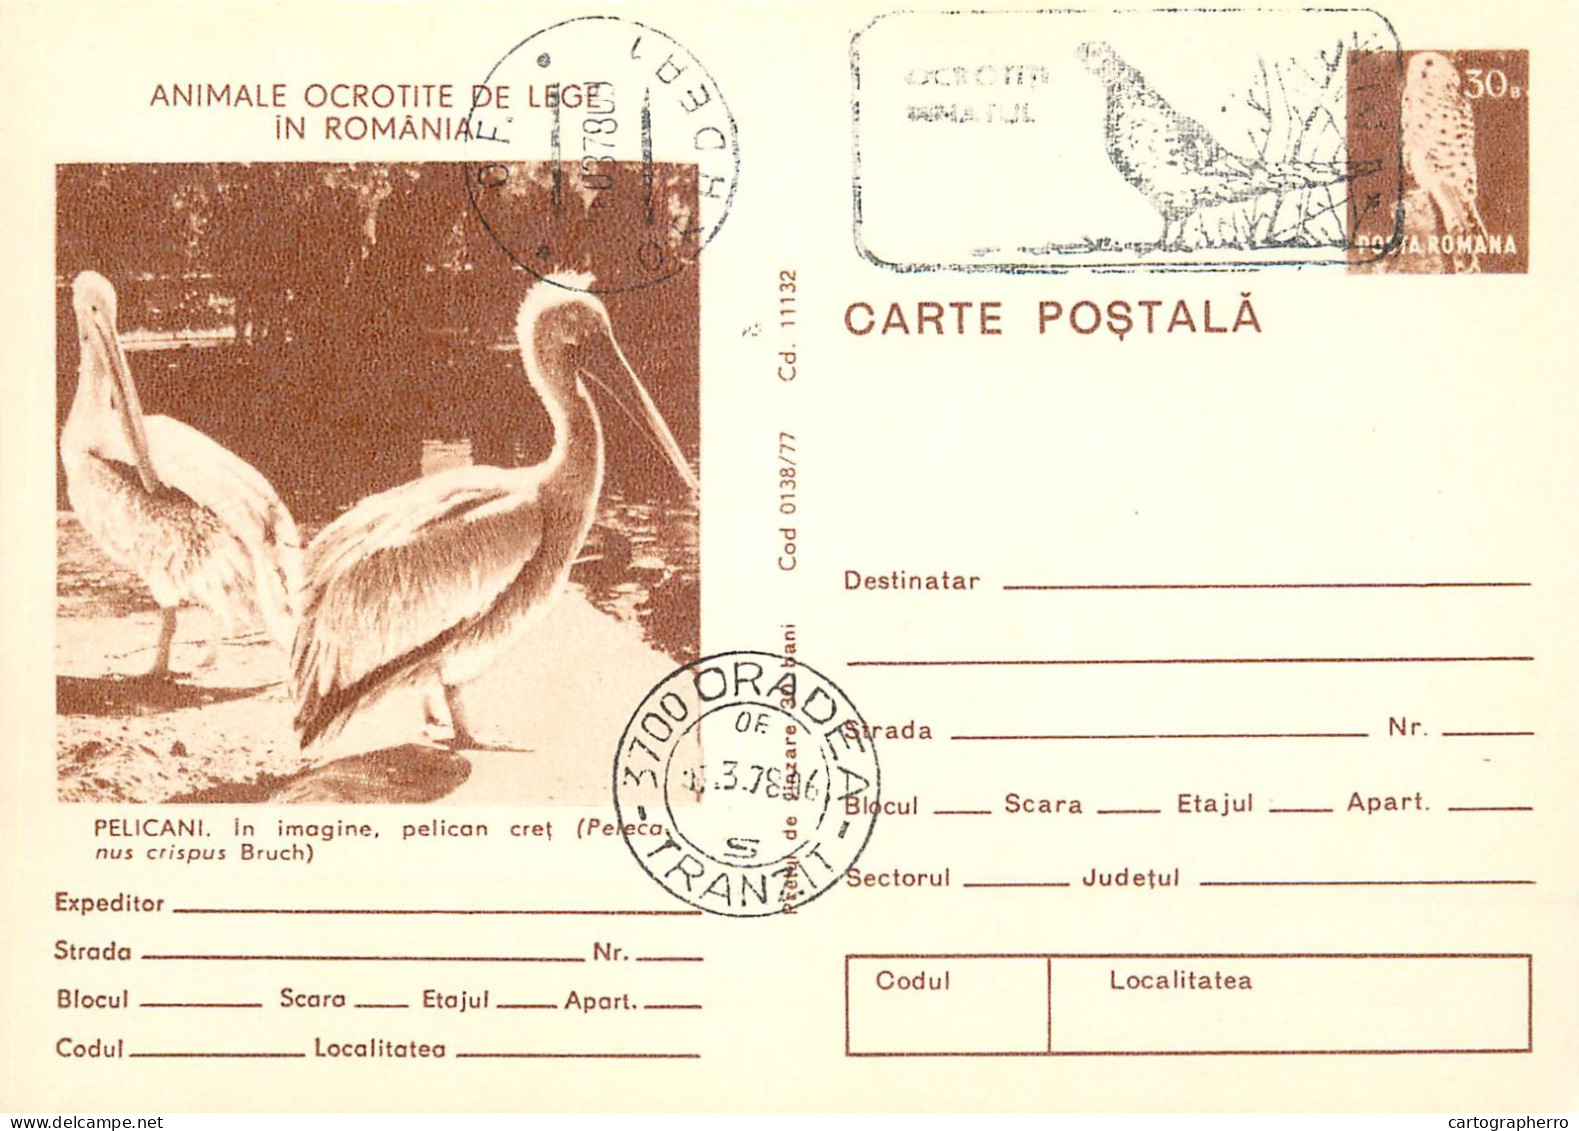 Animals protected by law in Romania set of 20 postal stationery cards 1980